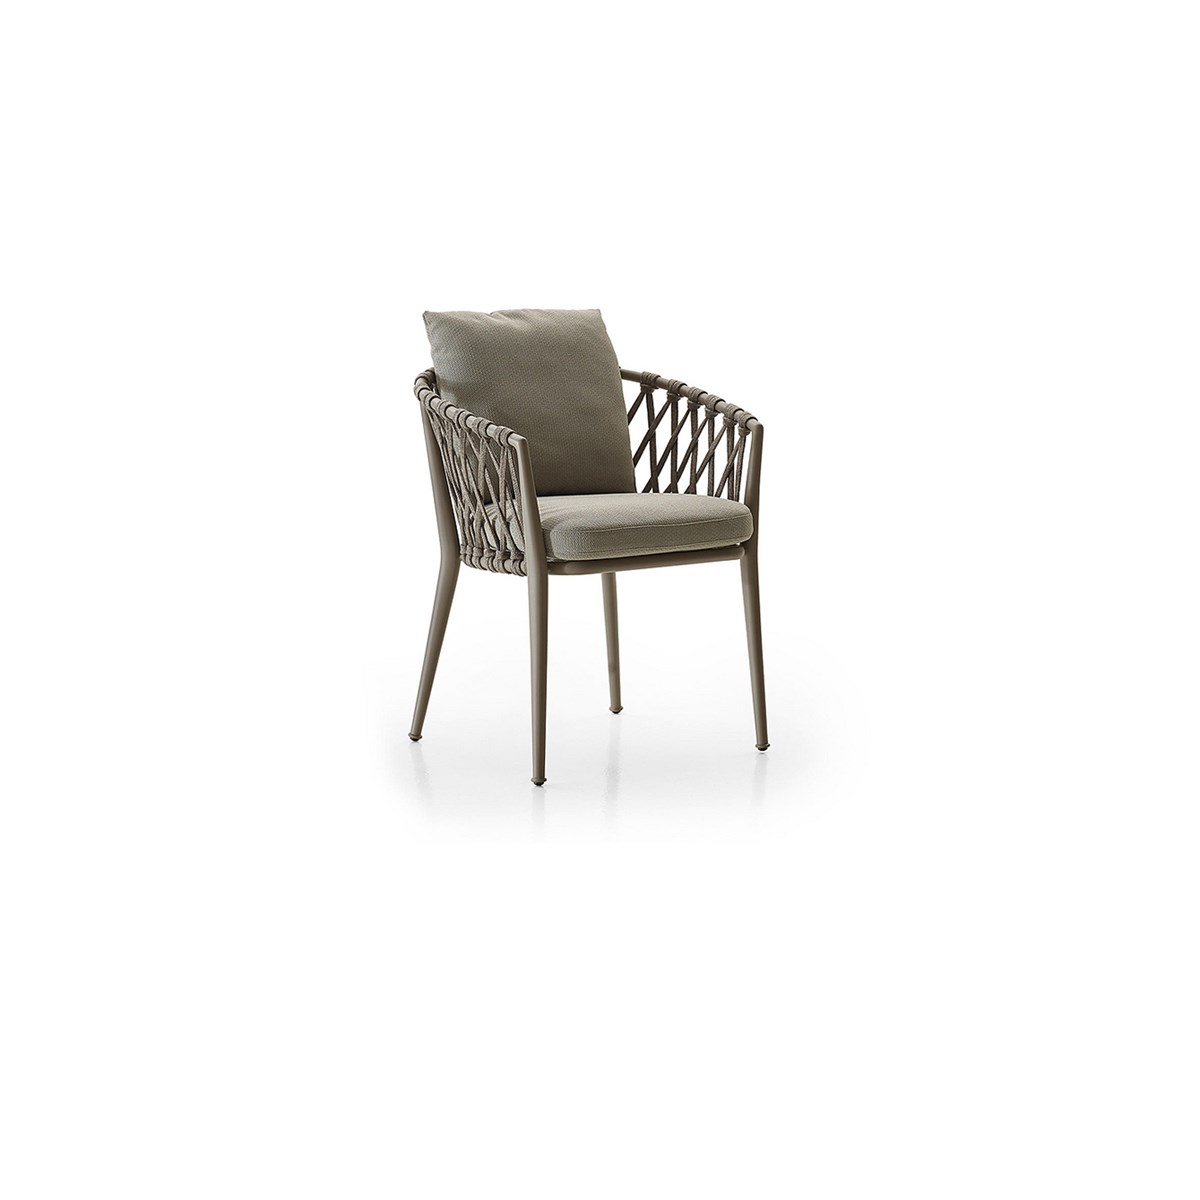 Erica Outdoor Chairs